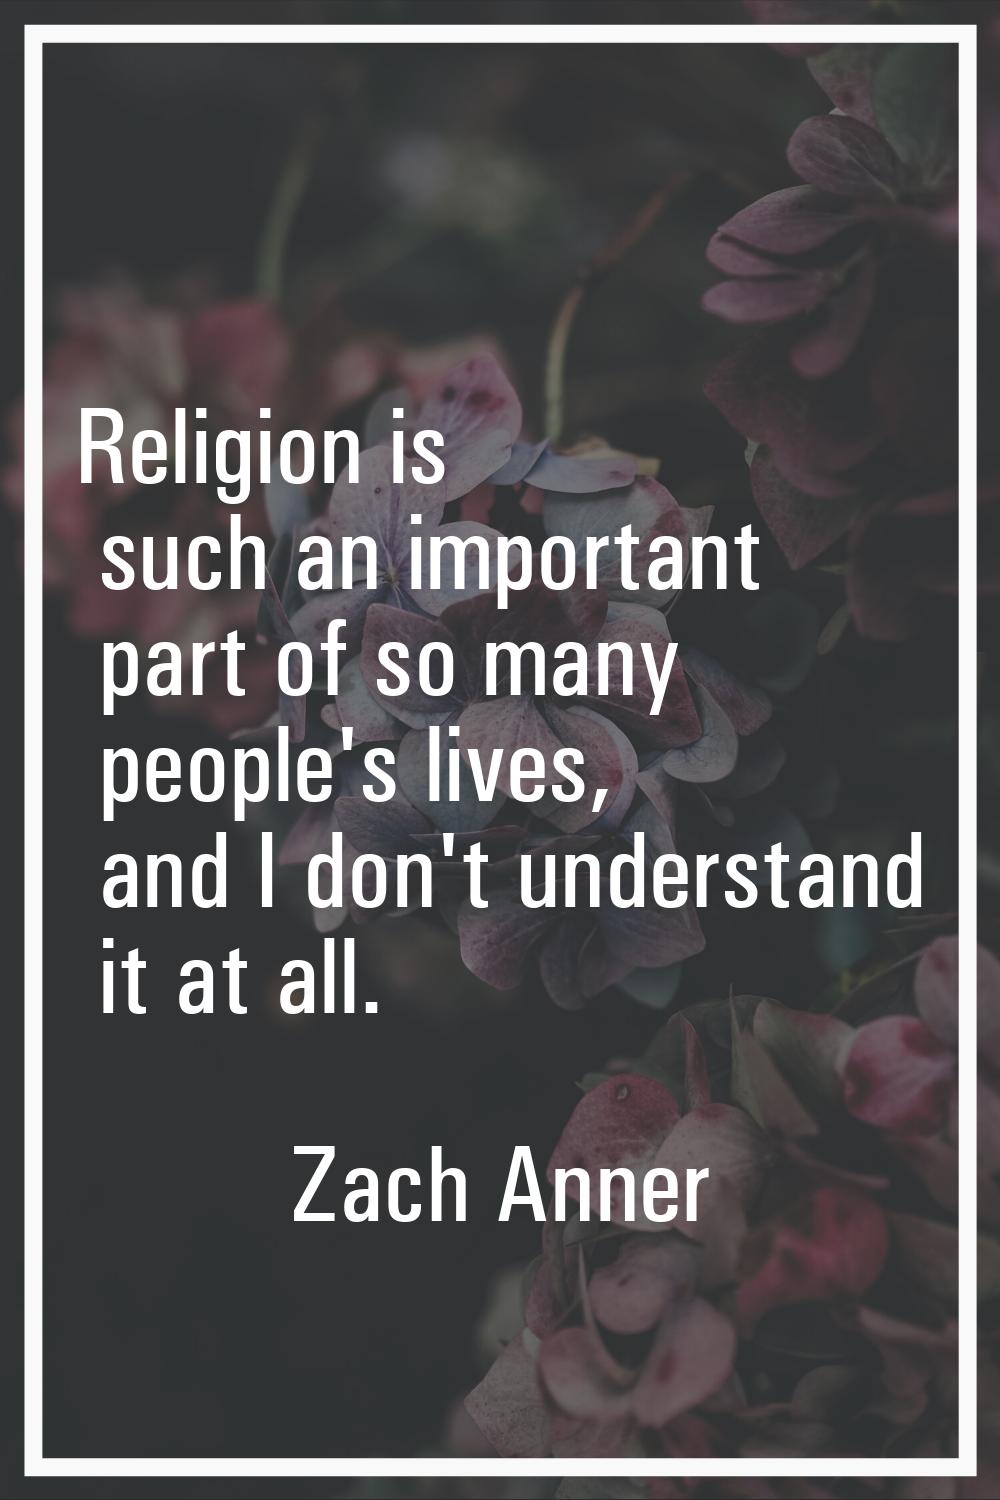 Religion is such an important part of so many people's lives, and I don't understand it at all.